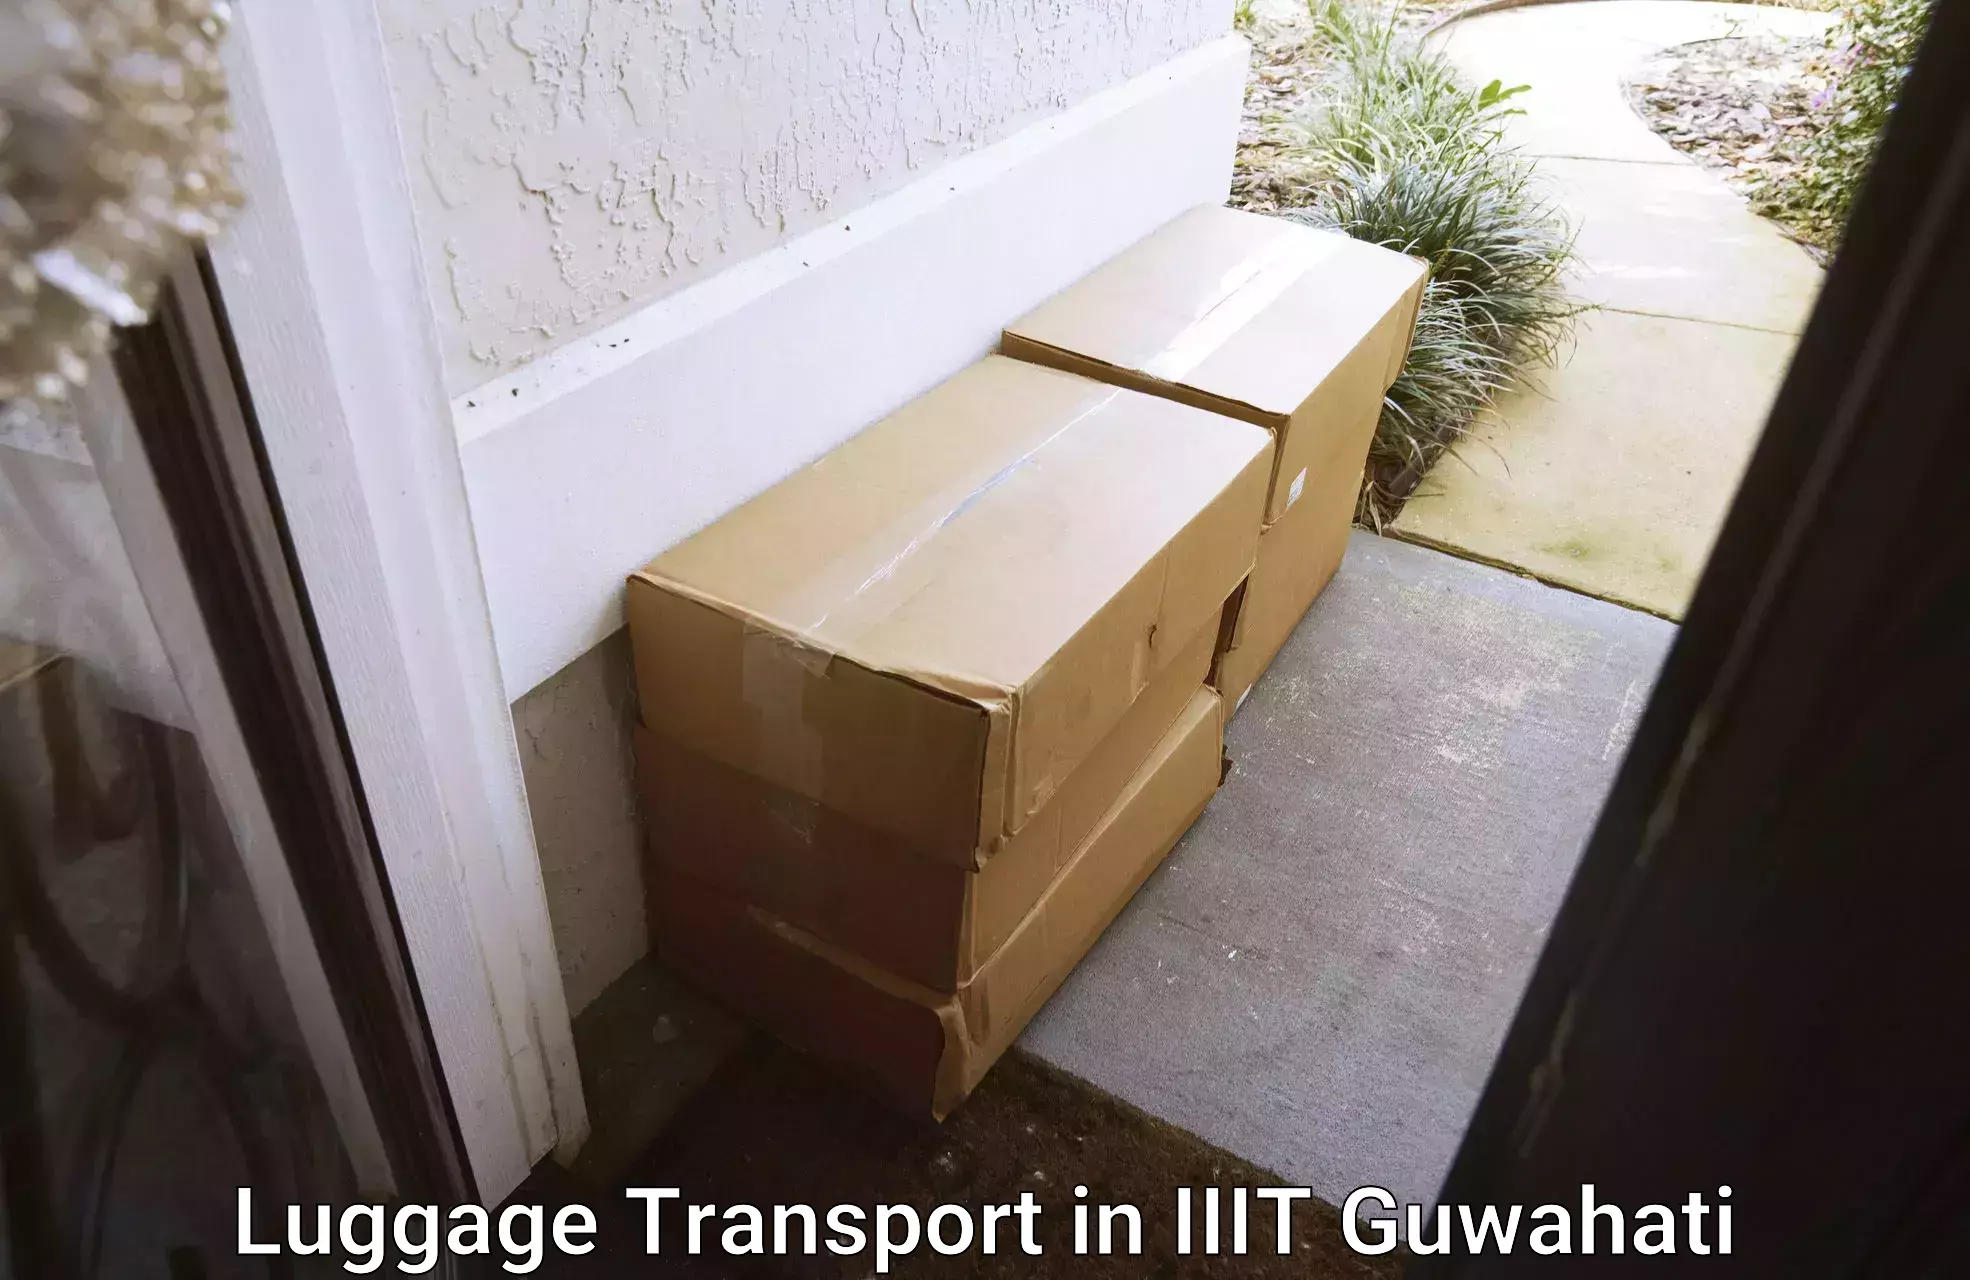 Baggage delivery support in IIIT Guwahati